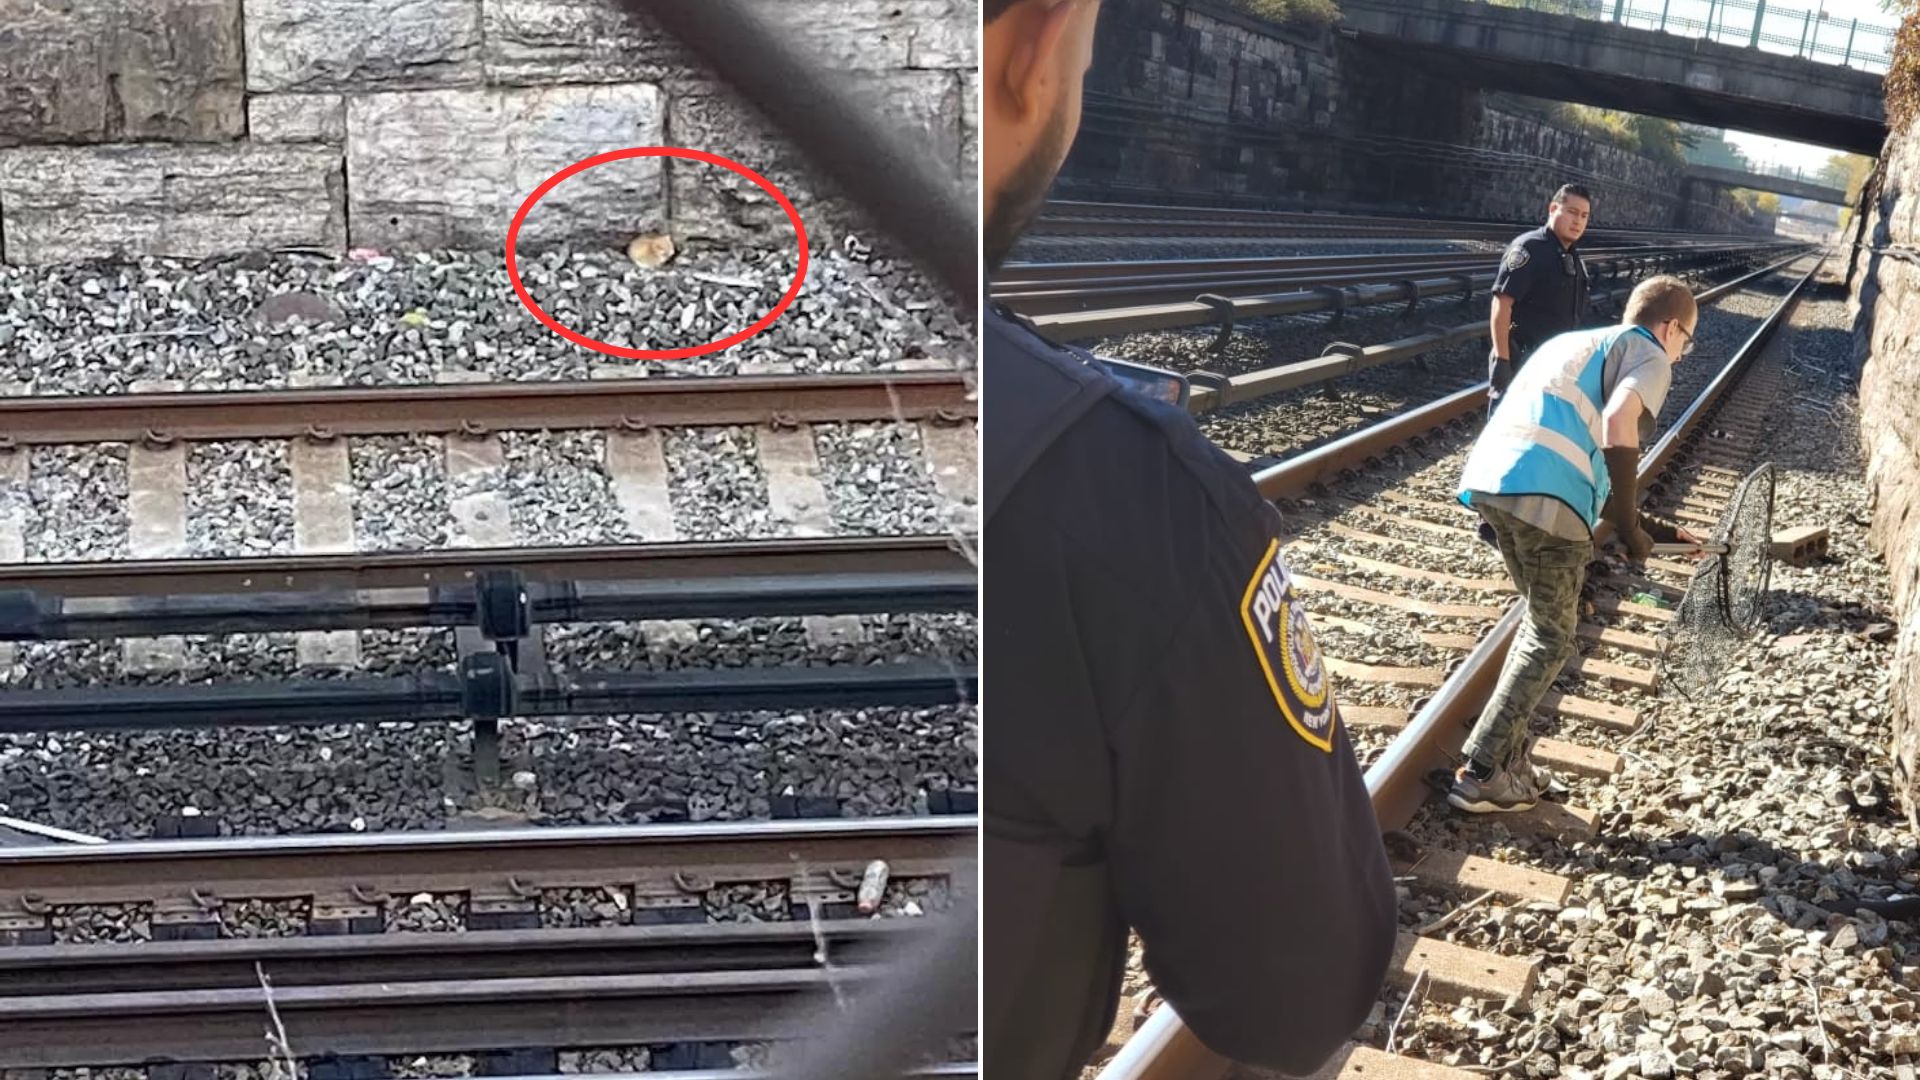 Woman Was Waiting For The Train And Then Noticed Something Unusual Near The Tracks